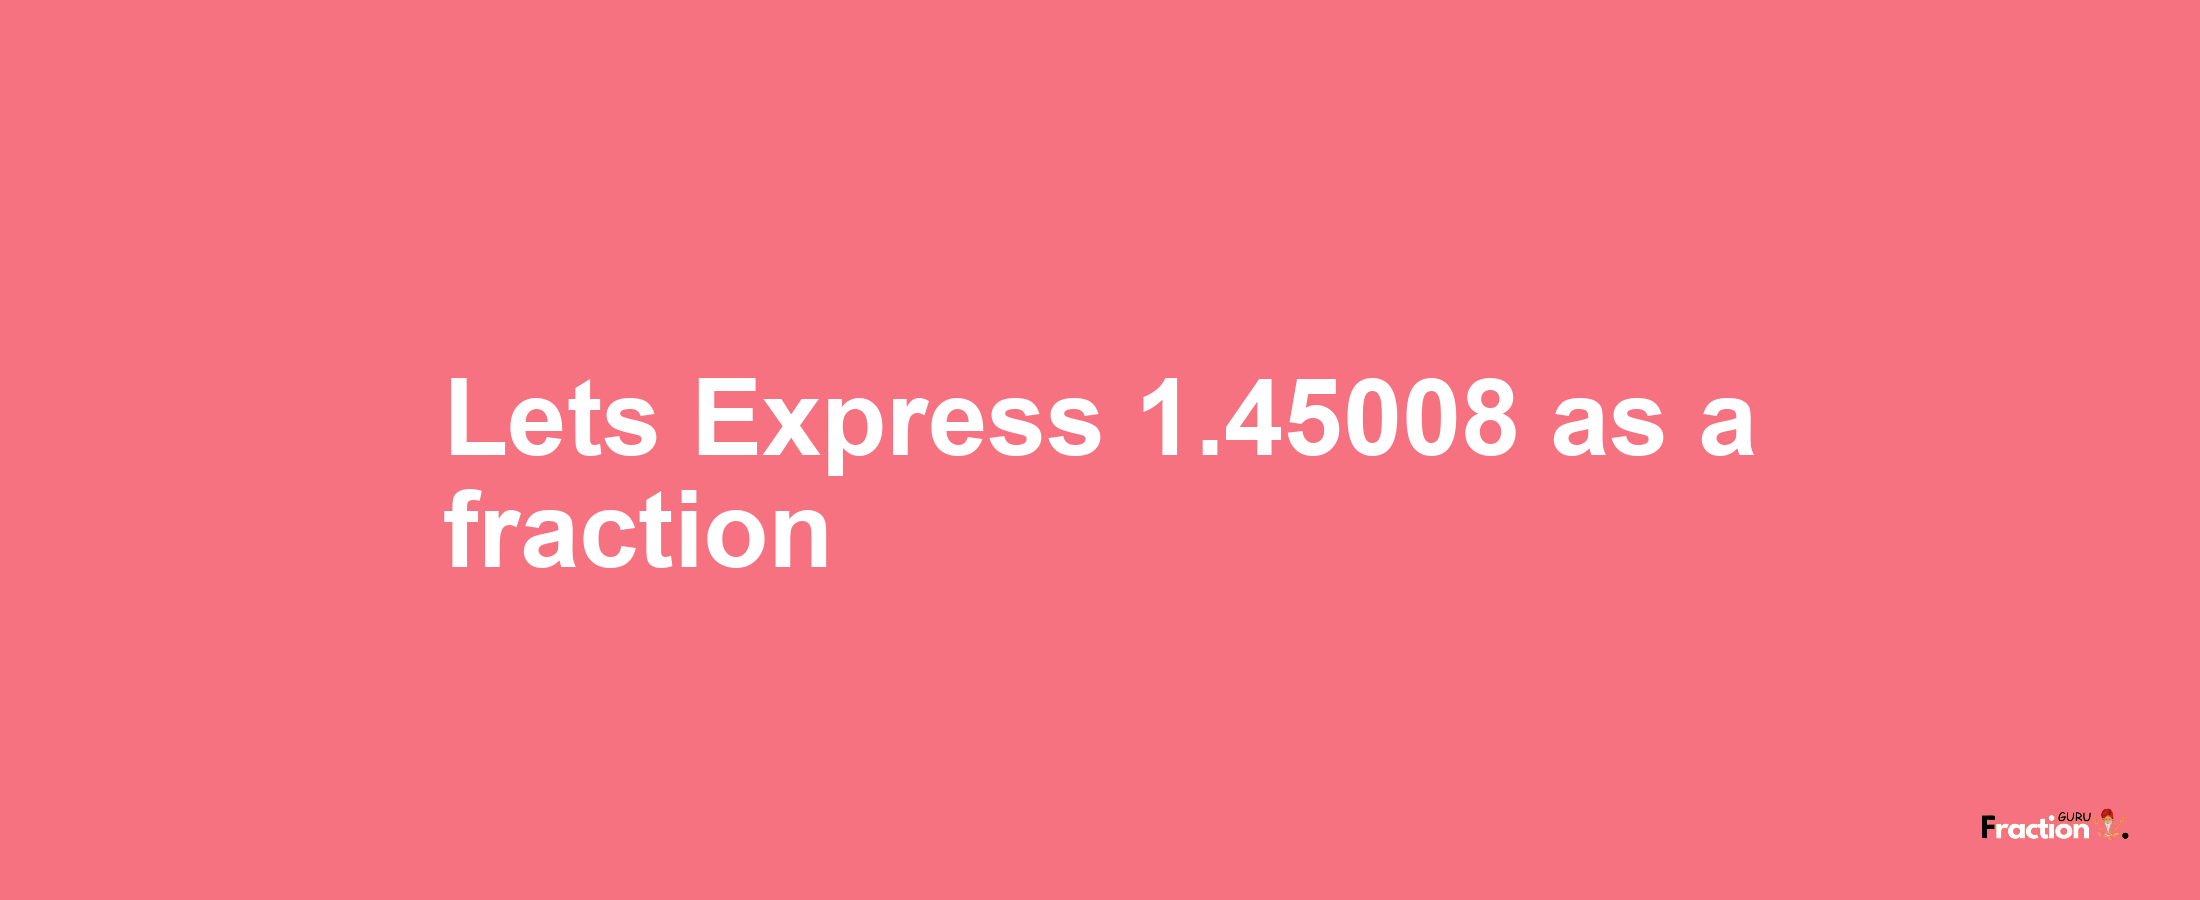 Lets Express 1.45008 as afraction